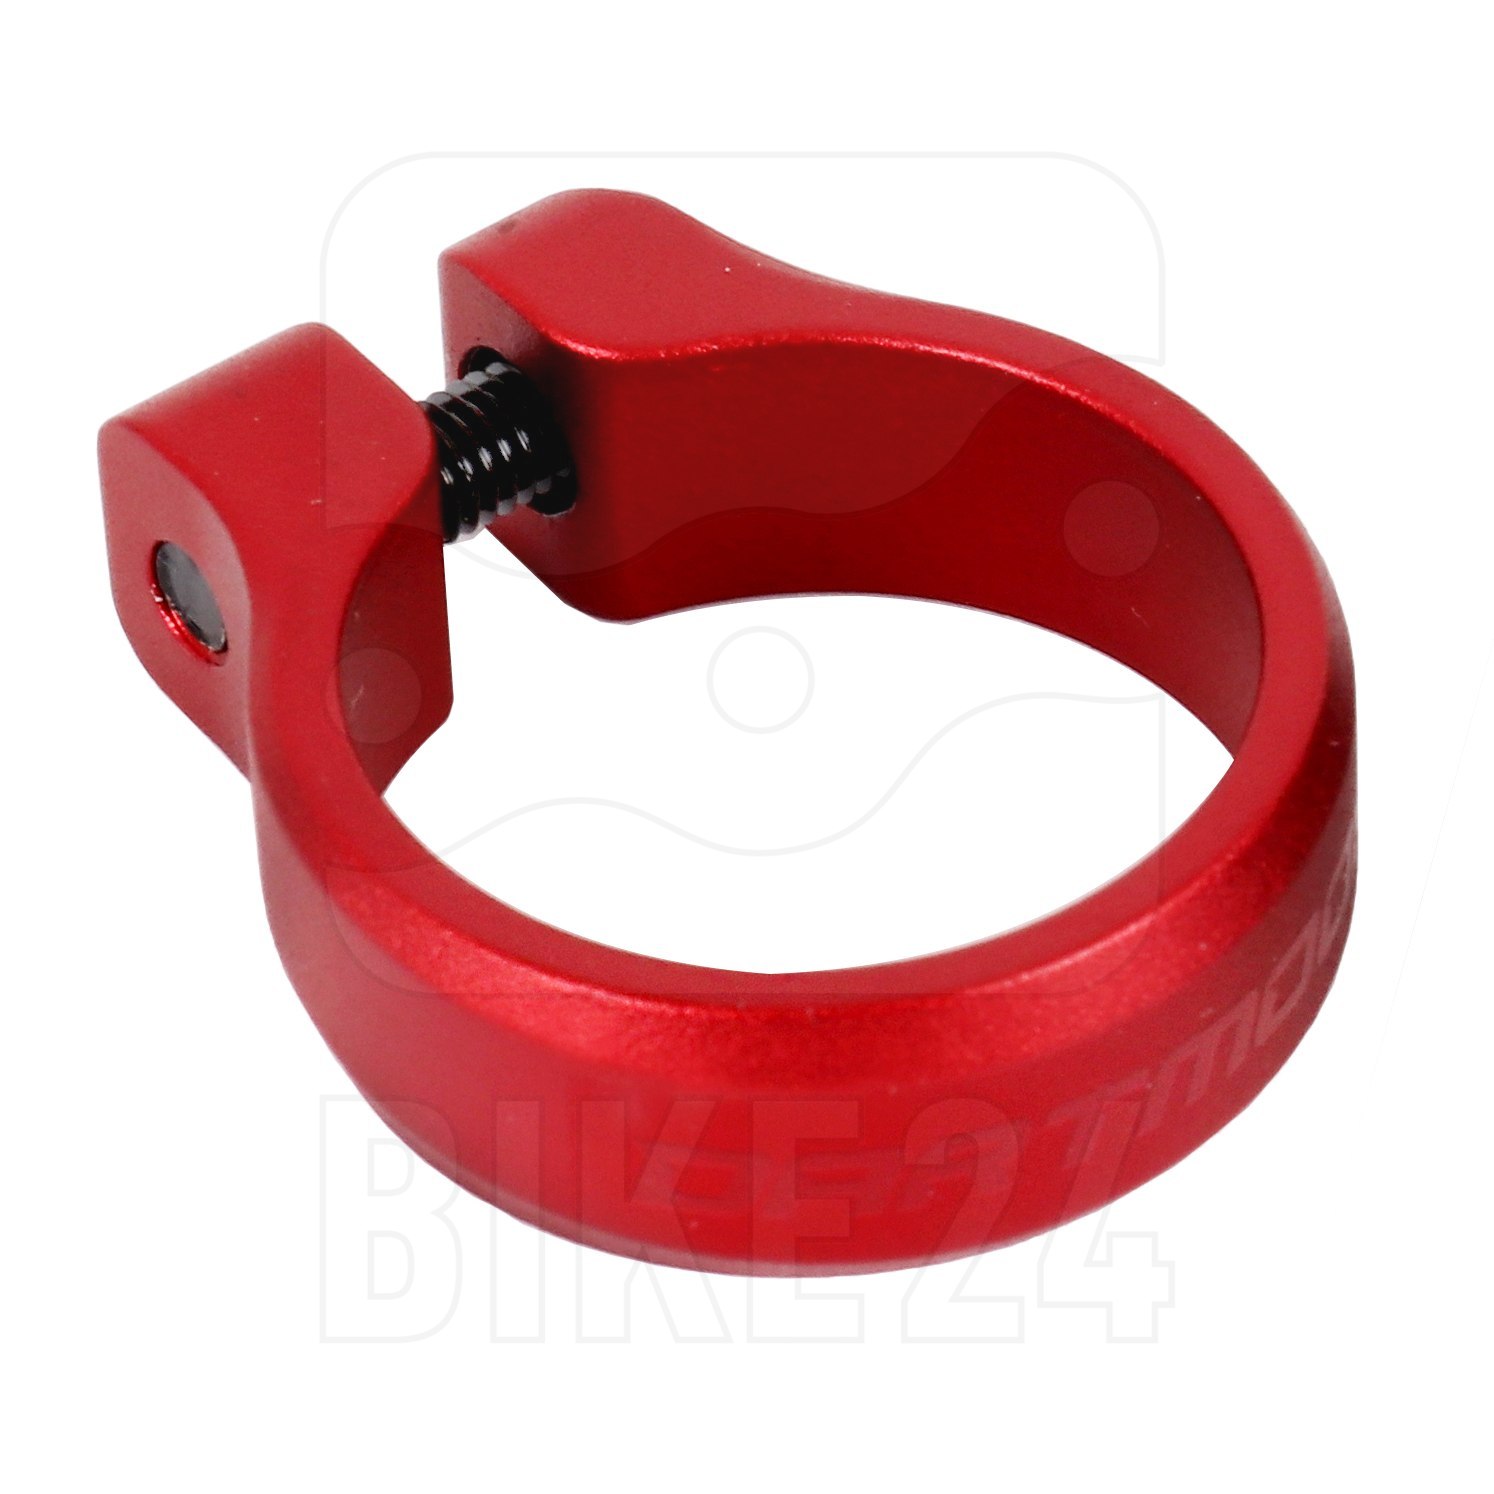 Picture of Dartmoor Loop Saddle Clamp - red